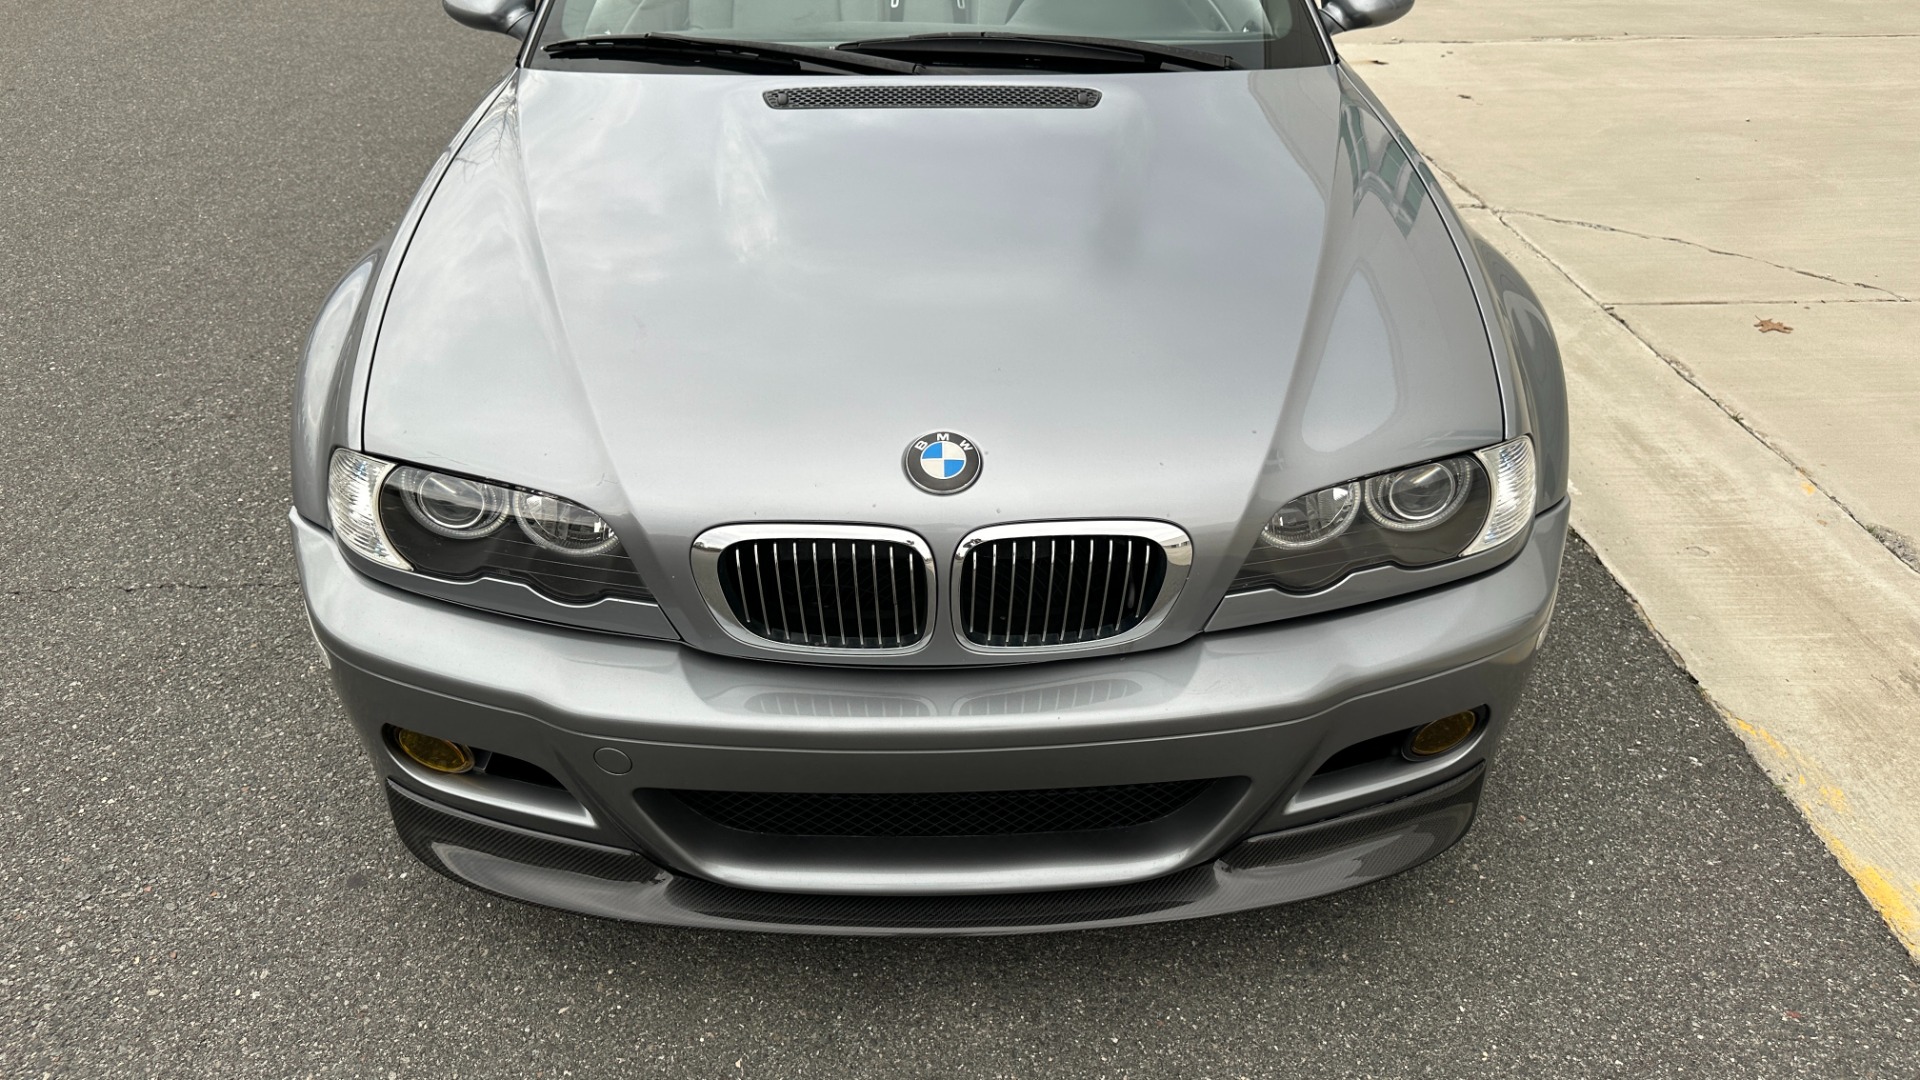 Used 2006 BMW M3 CONVERTIBLE / SMG AUTO / LEATHER / INLINE 6CYL / CARBON FIBER for sale $26,595 at Formula Imports in Charlotte NC 28227 43